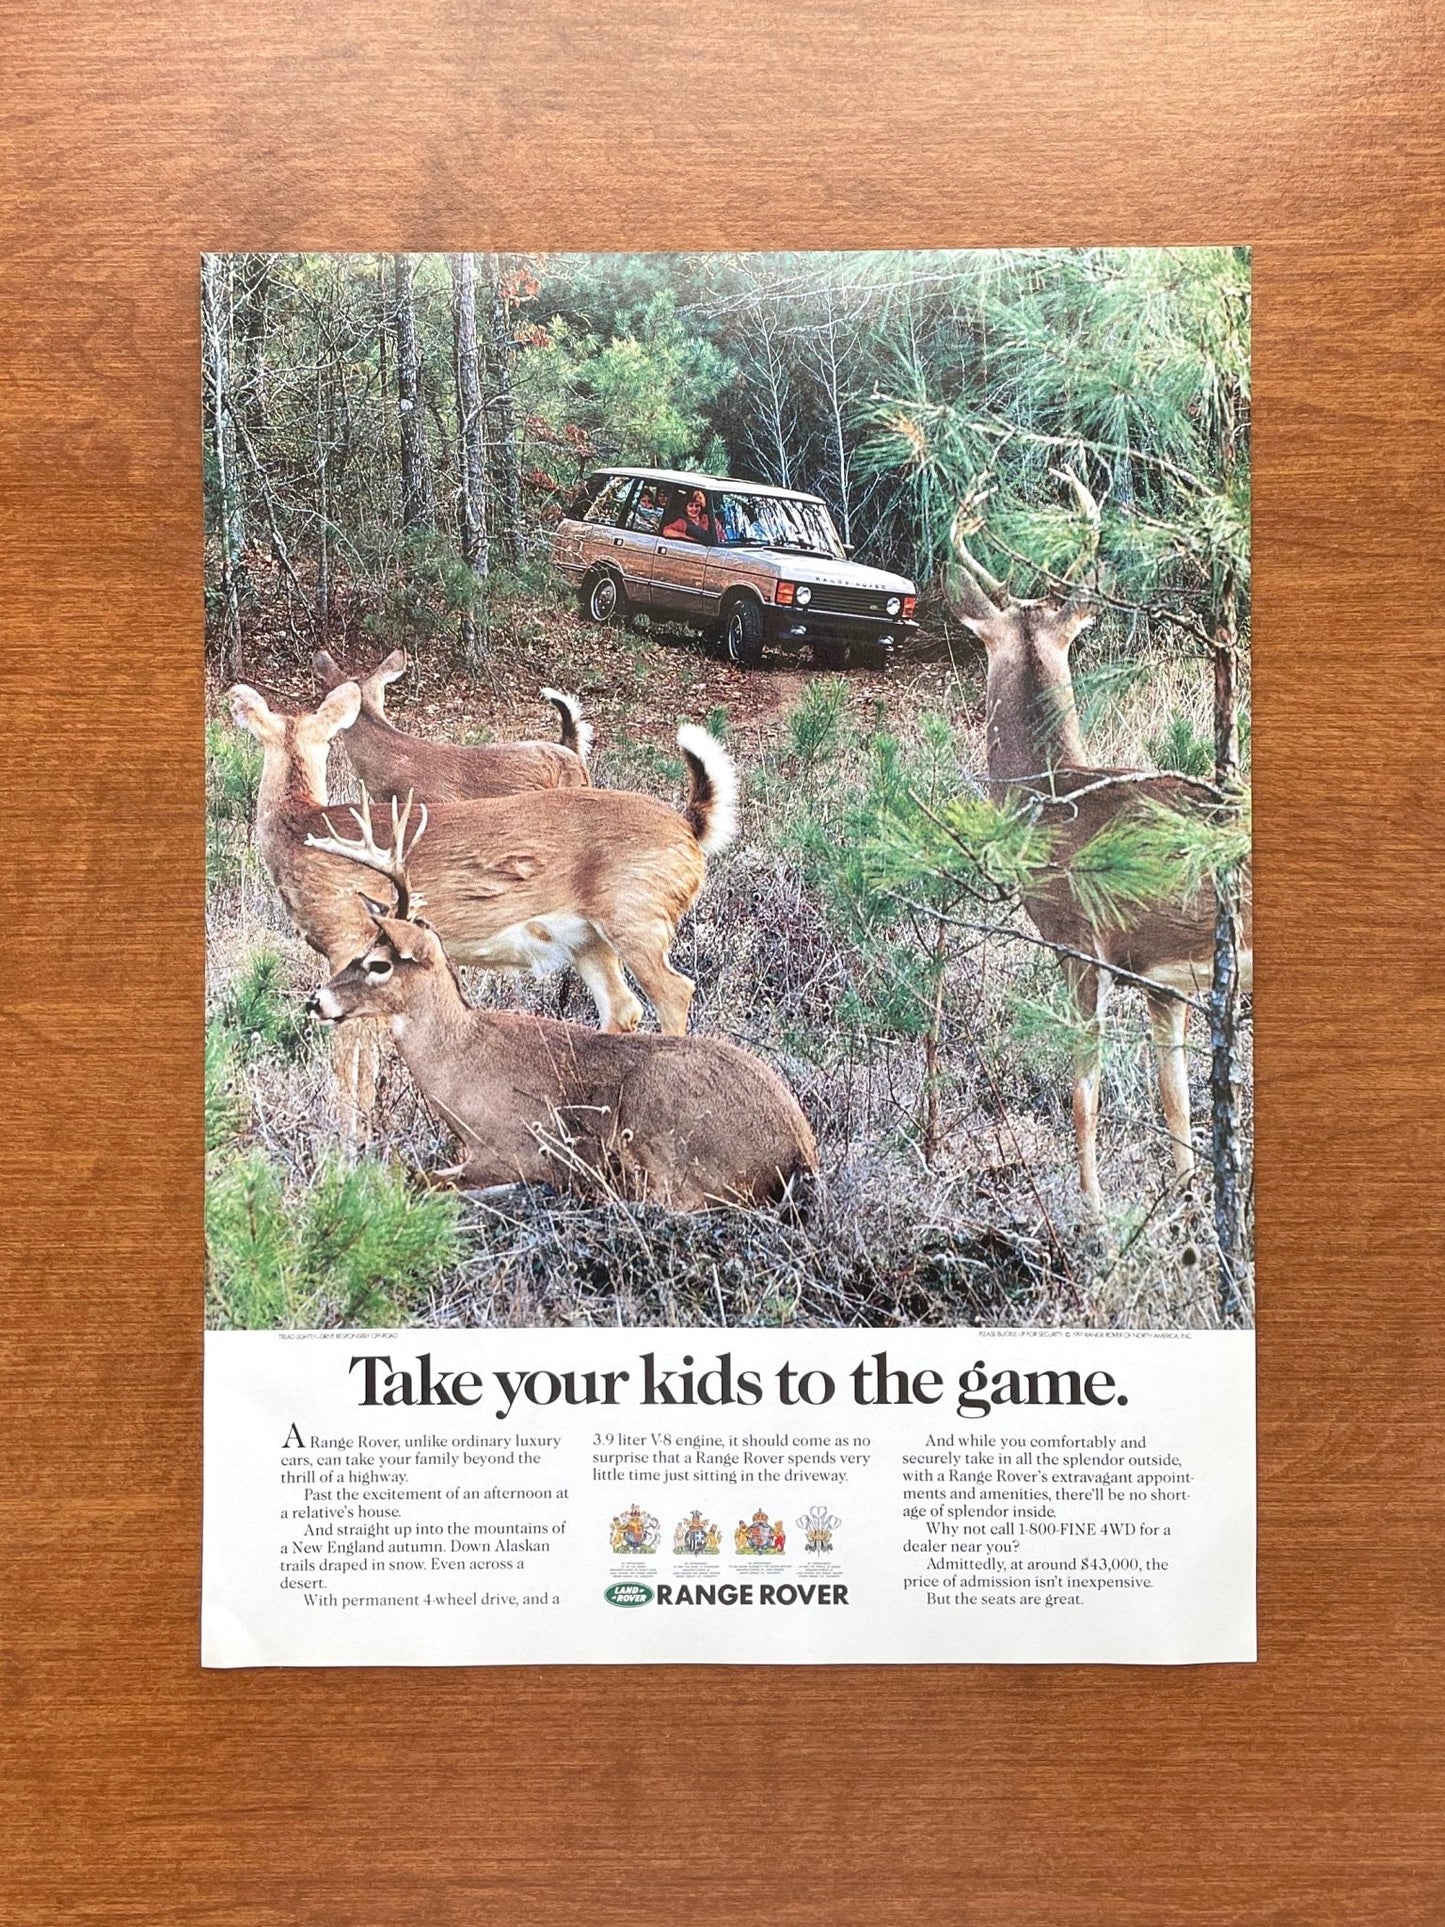 1991 Range Rover "Take your kids to the game." Advertisement